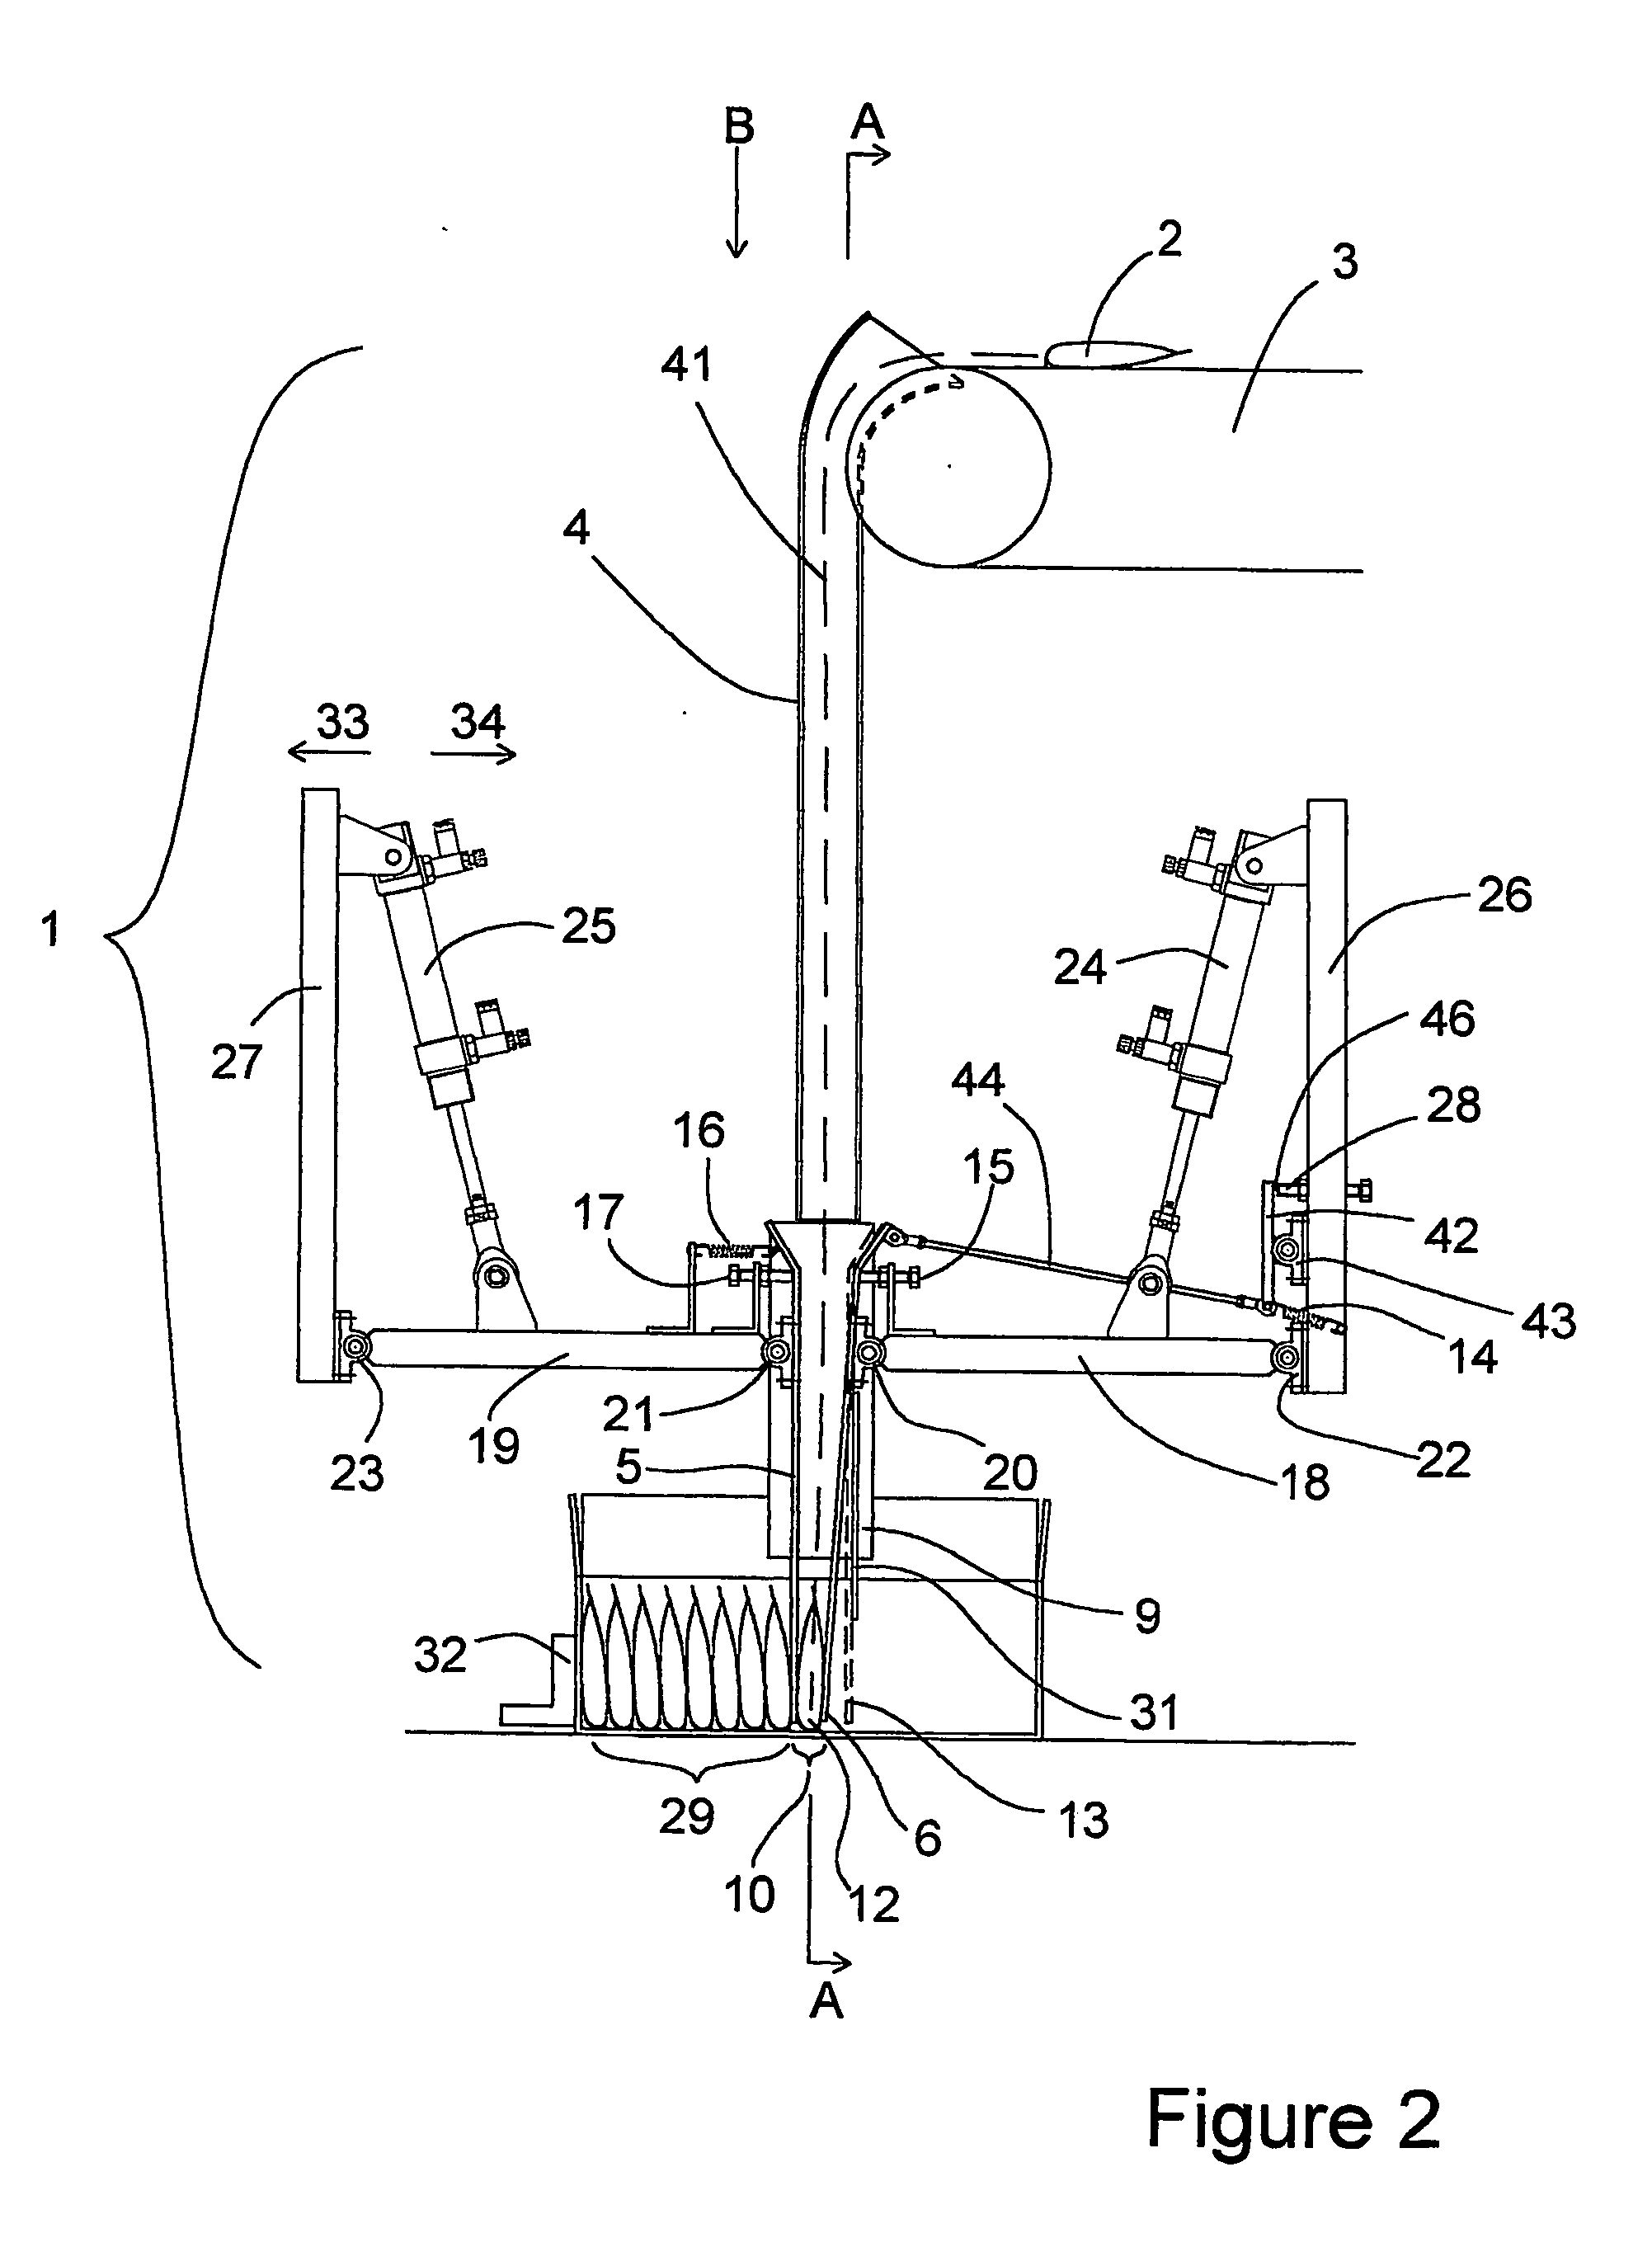 Device for guiding objects into containers